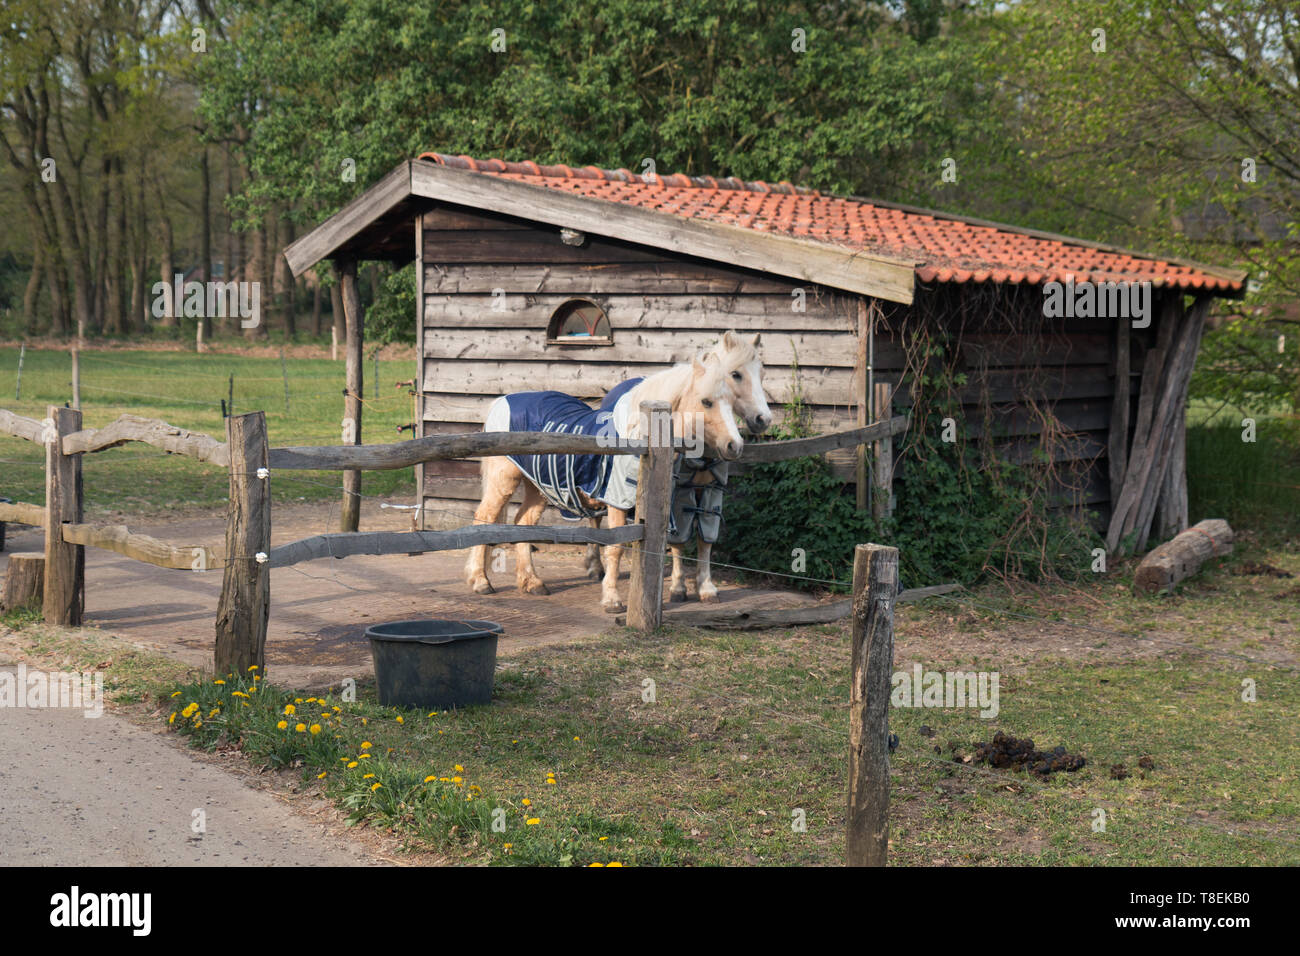 Horses and ponies, rural life, landscape. Stock Photo